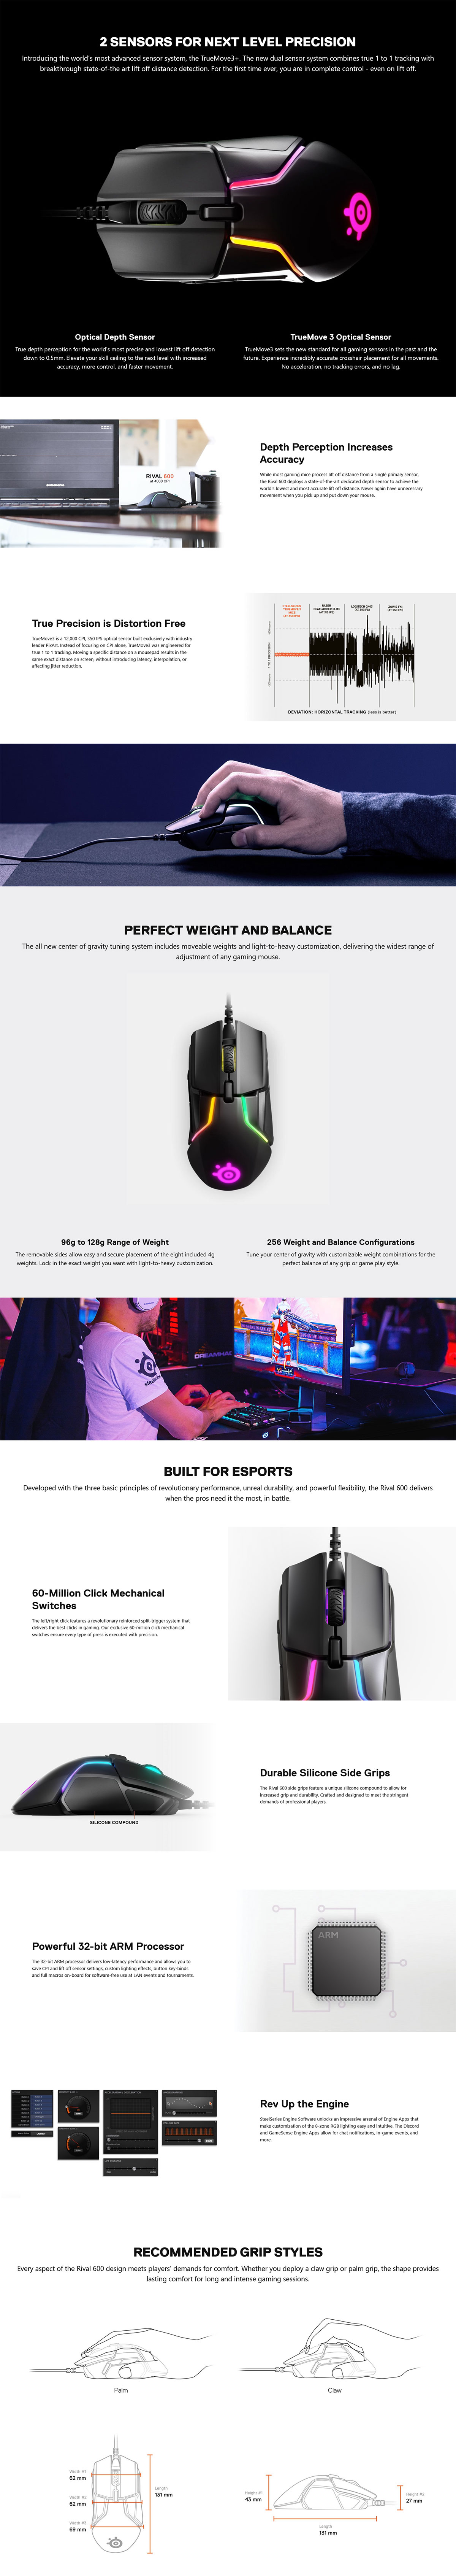 SteelSeries Rival 600 Dual Sensor Wired Customizable Gaming Mouse RGB 62446 Details